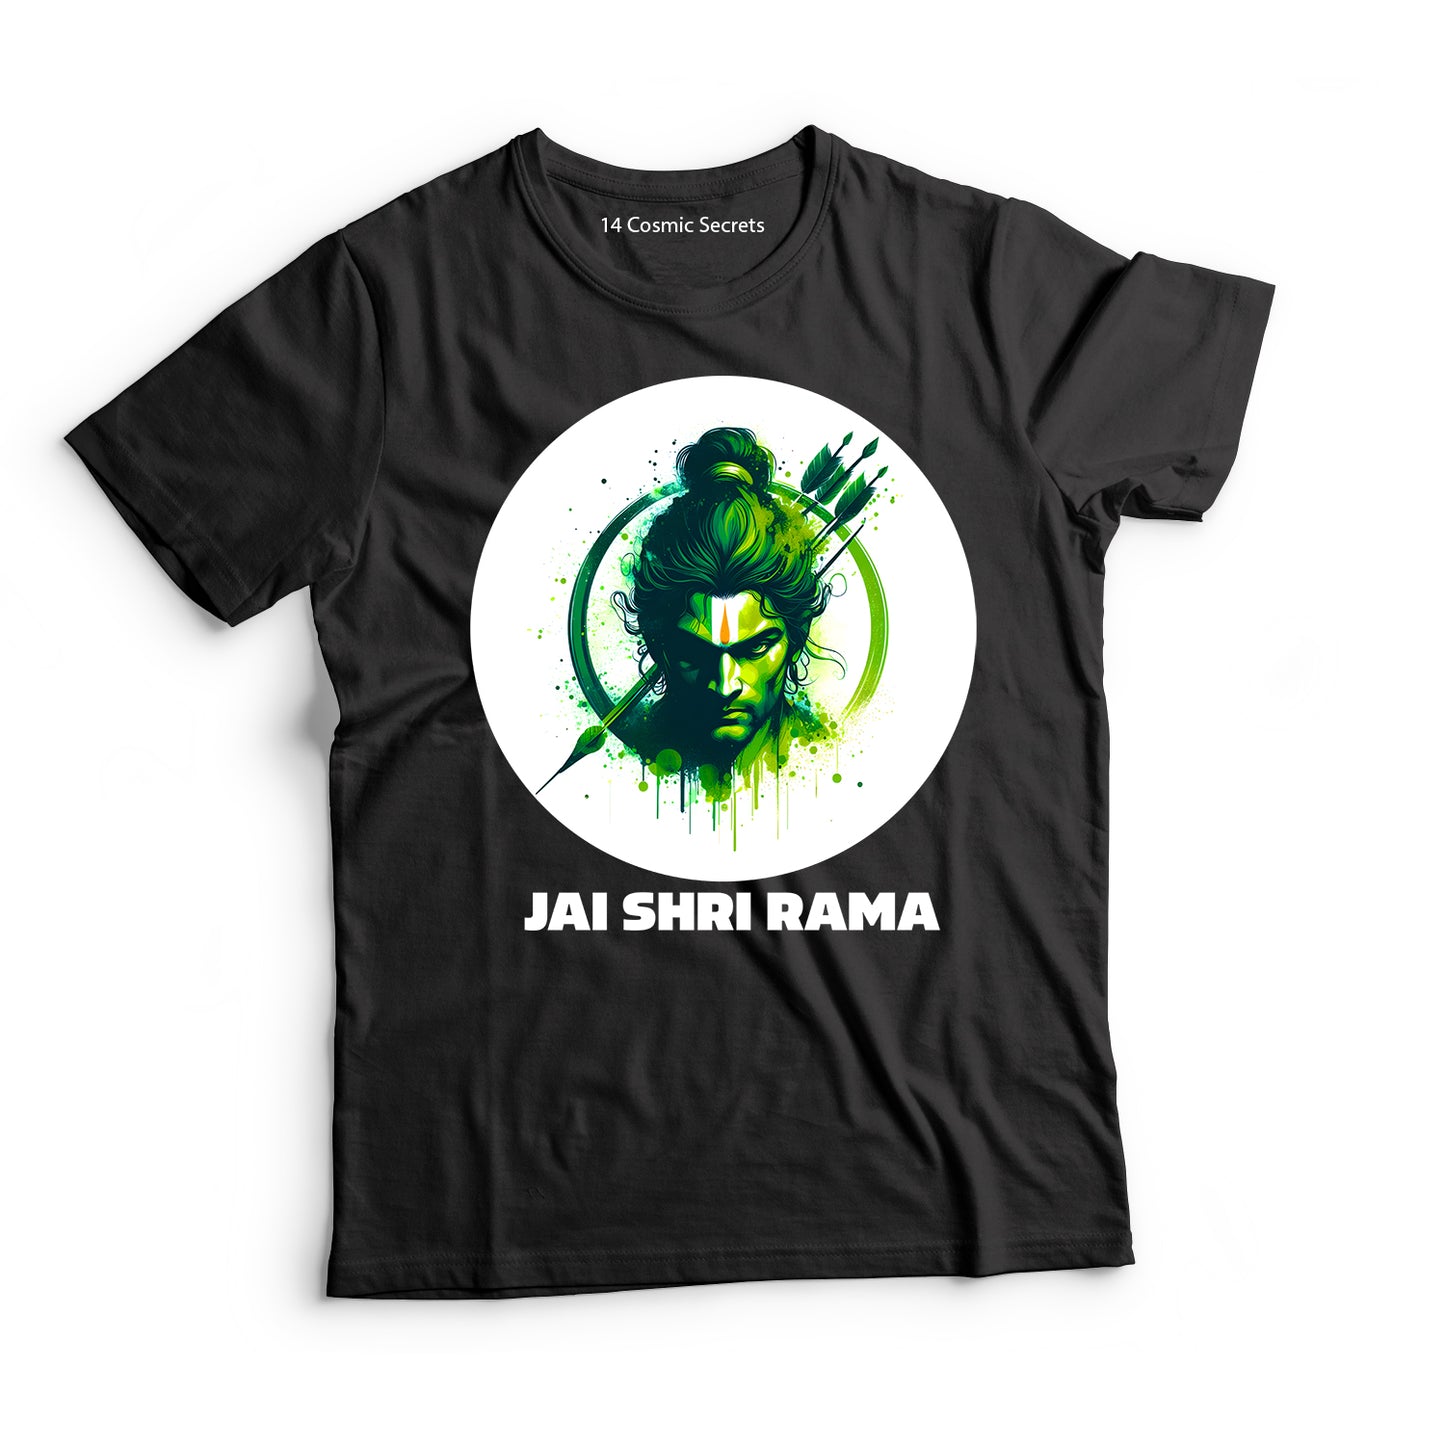 Rama the Conqueror: Demon Slayer Graphic Printed T-Shirt for Men Cotton T-Shirt Original Super Heroes of India T-Shirt